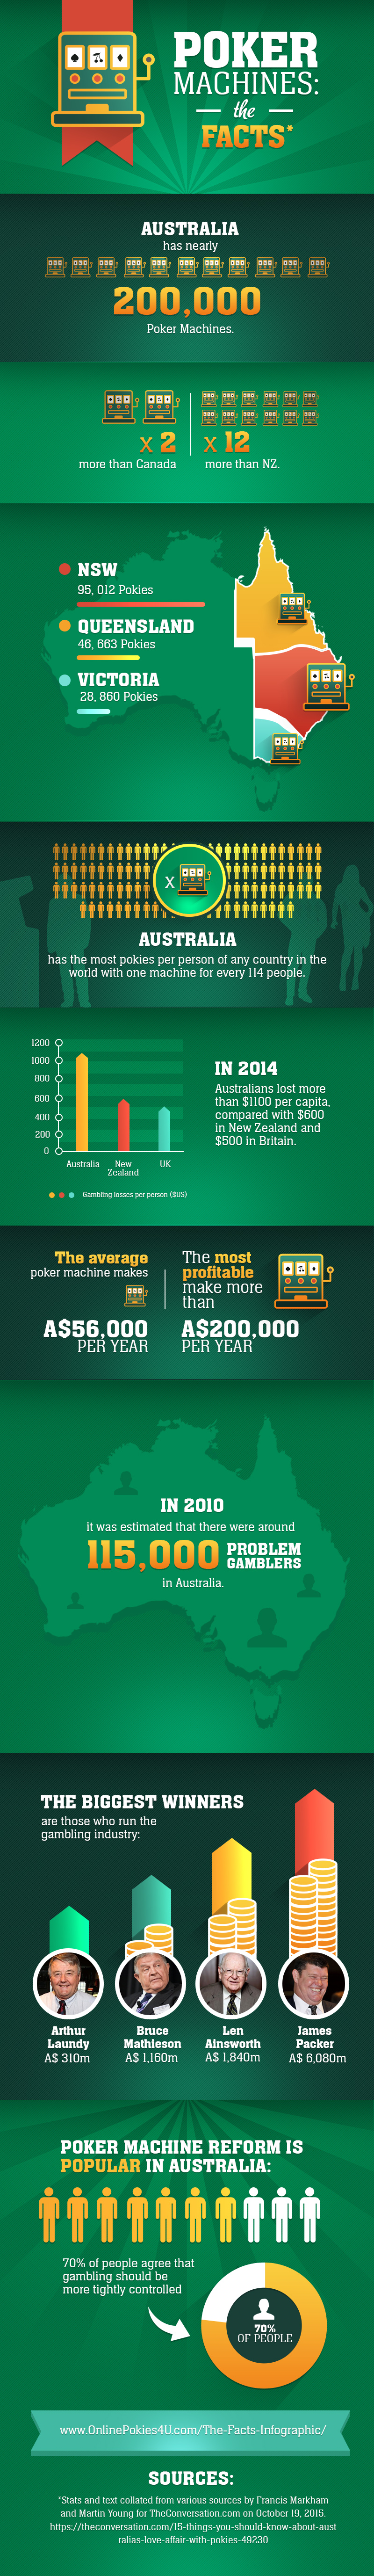 Poker Machines in Australia: The Facts